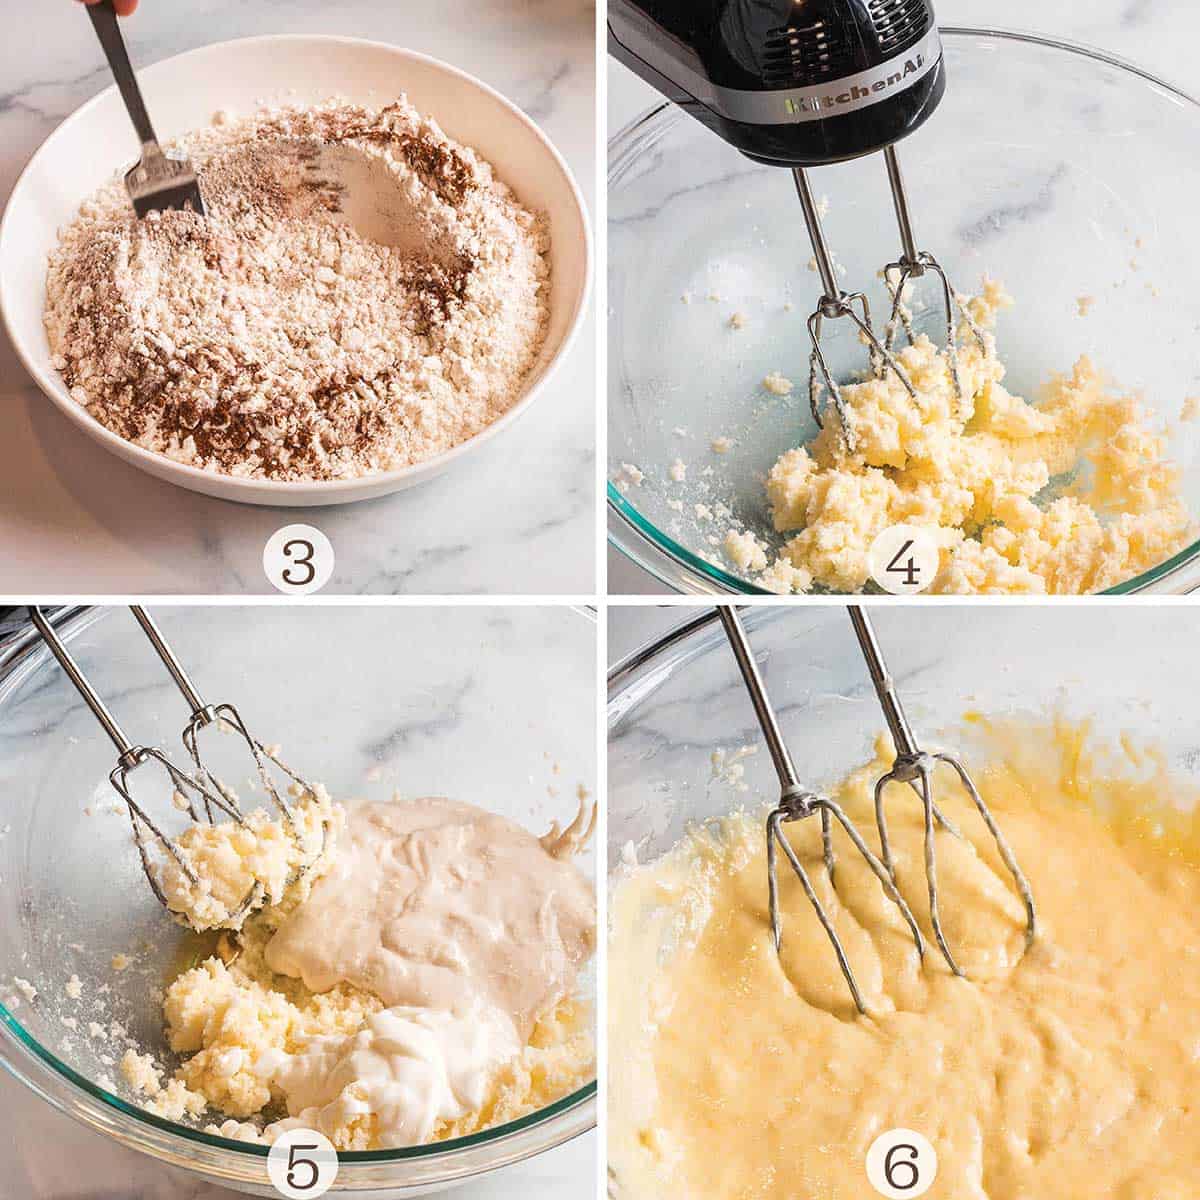 Four images showing how to make banana bread. Mixing the dry ingredients, creaming the butter and sugar and mixing in discard and eggs.